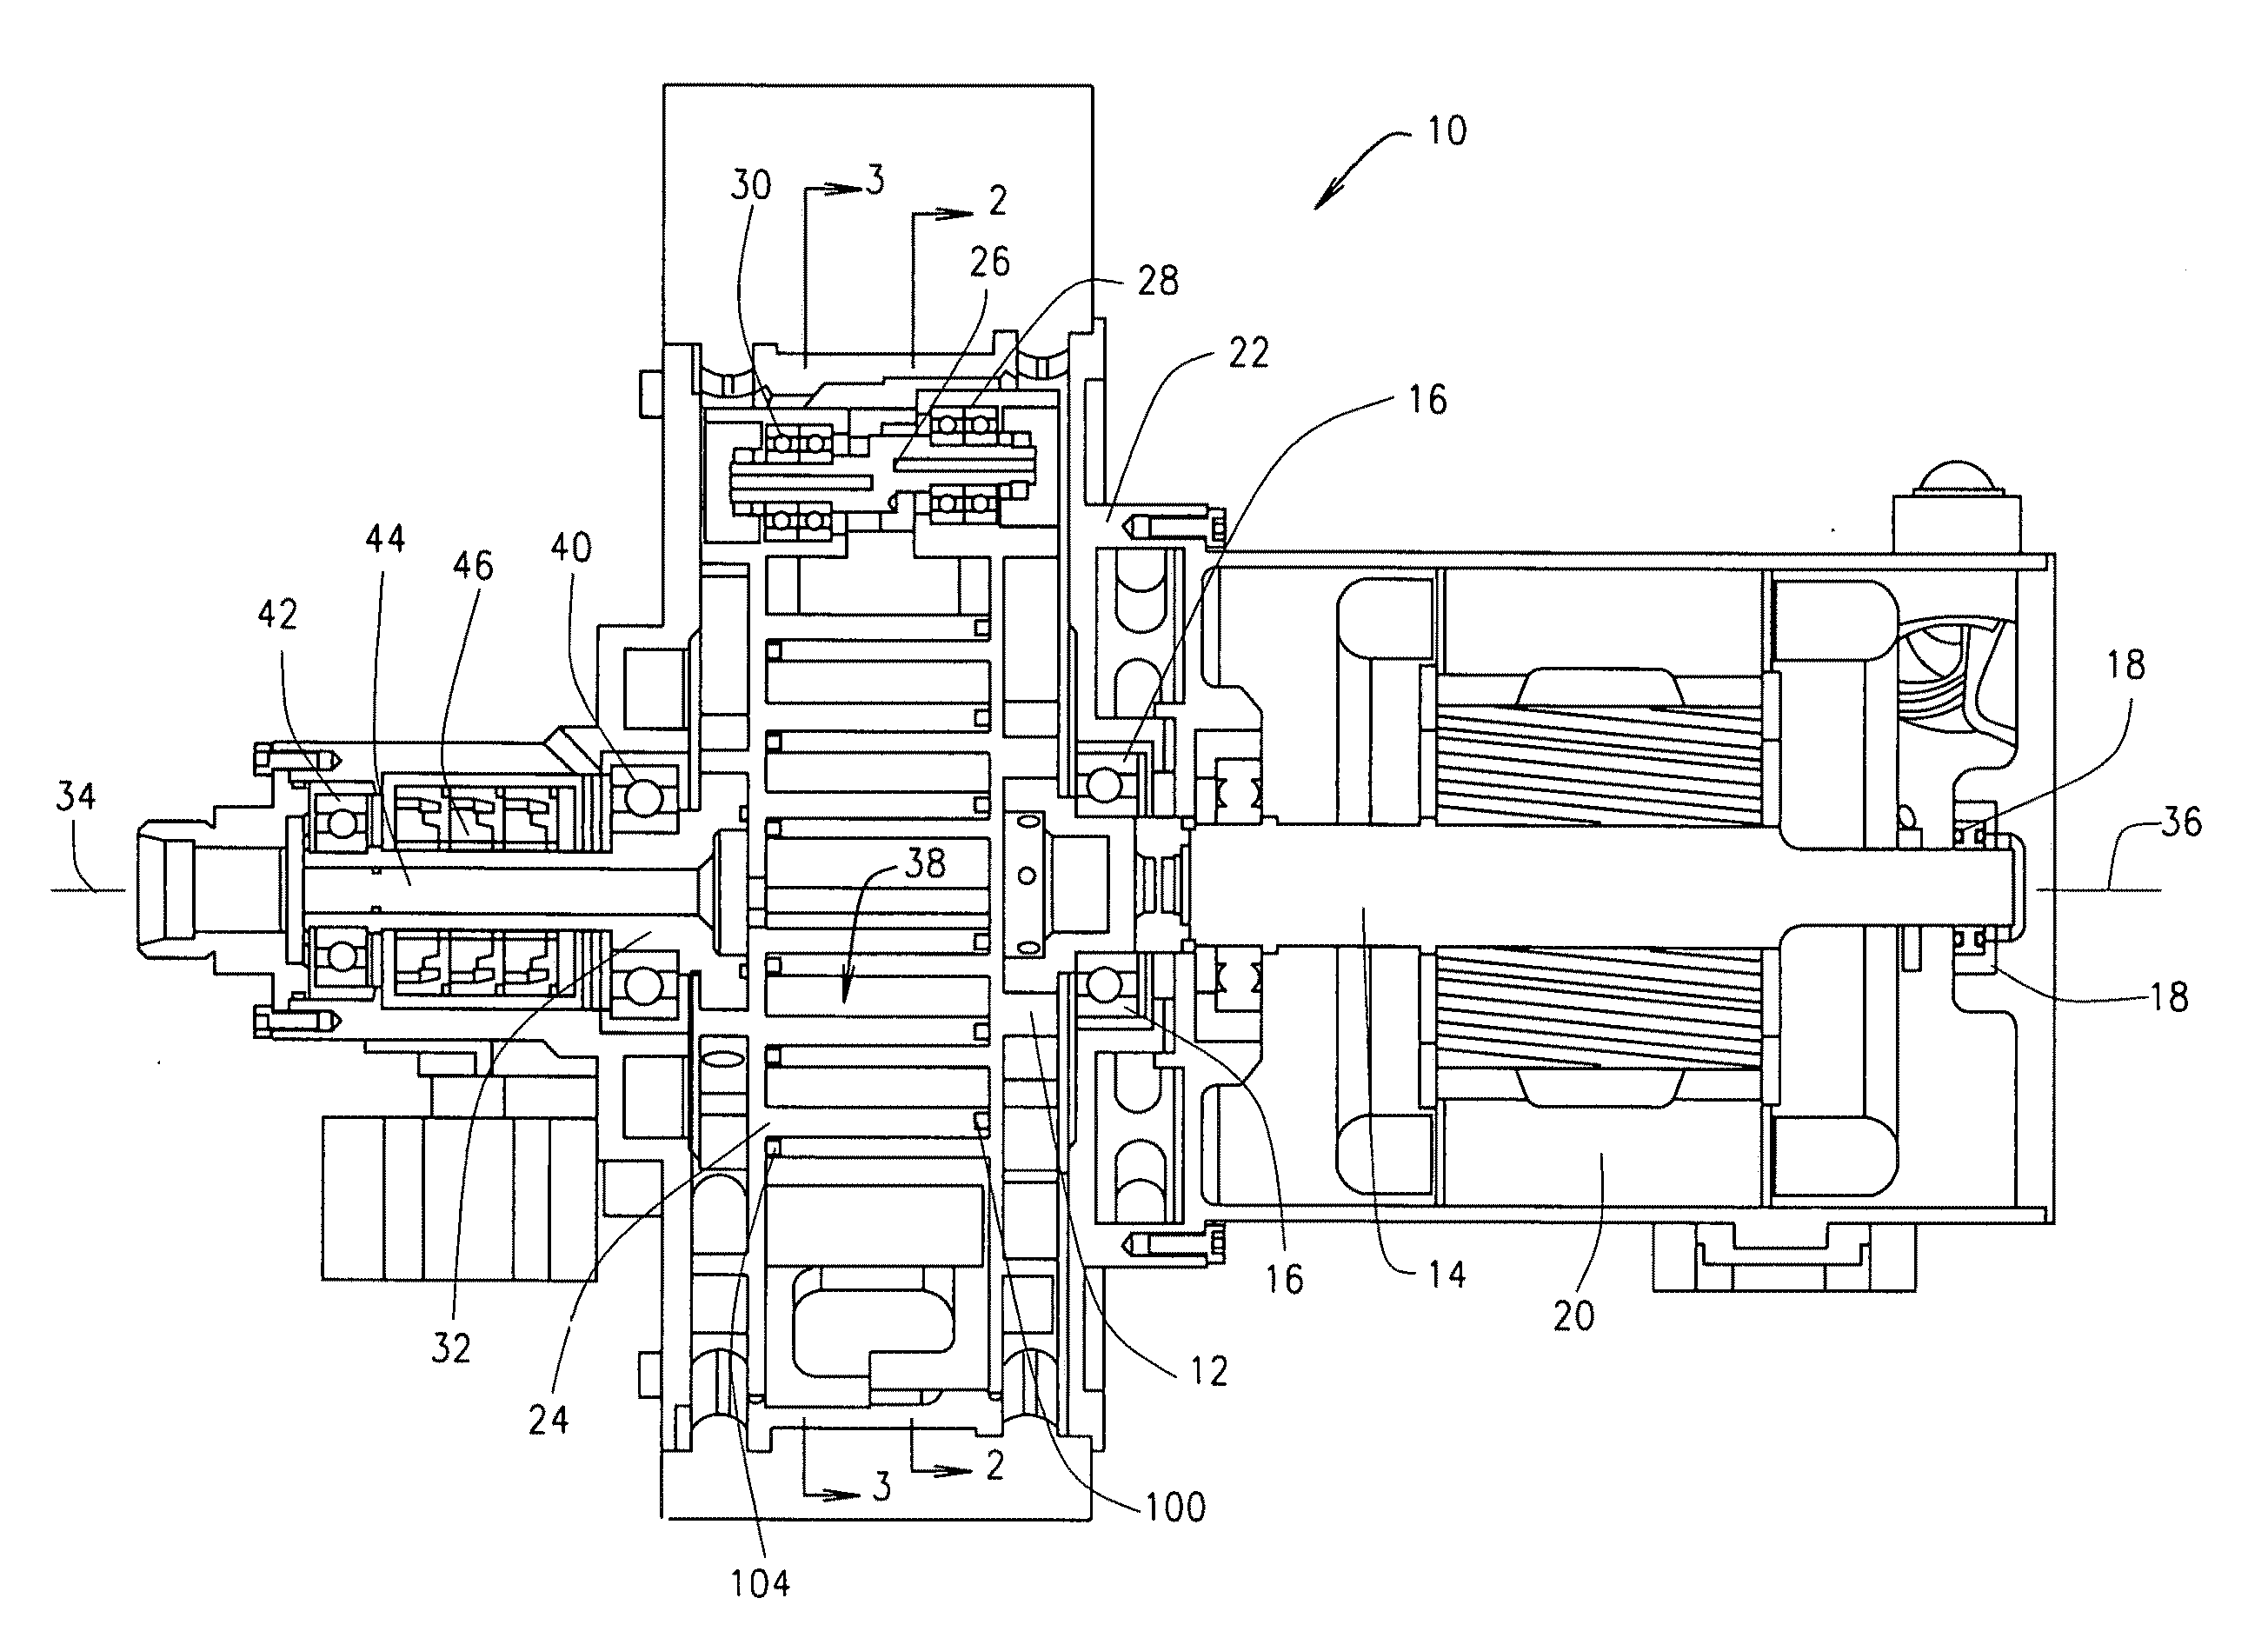 Scroll type device incorporating spinning or co-rotating scrolls